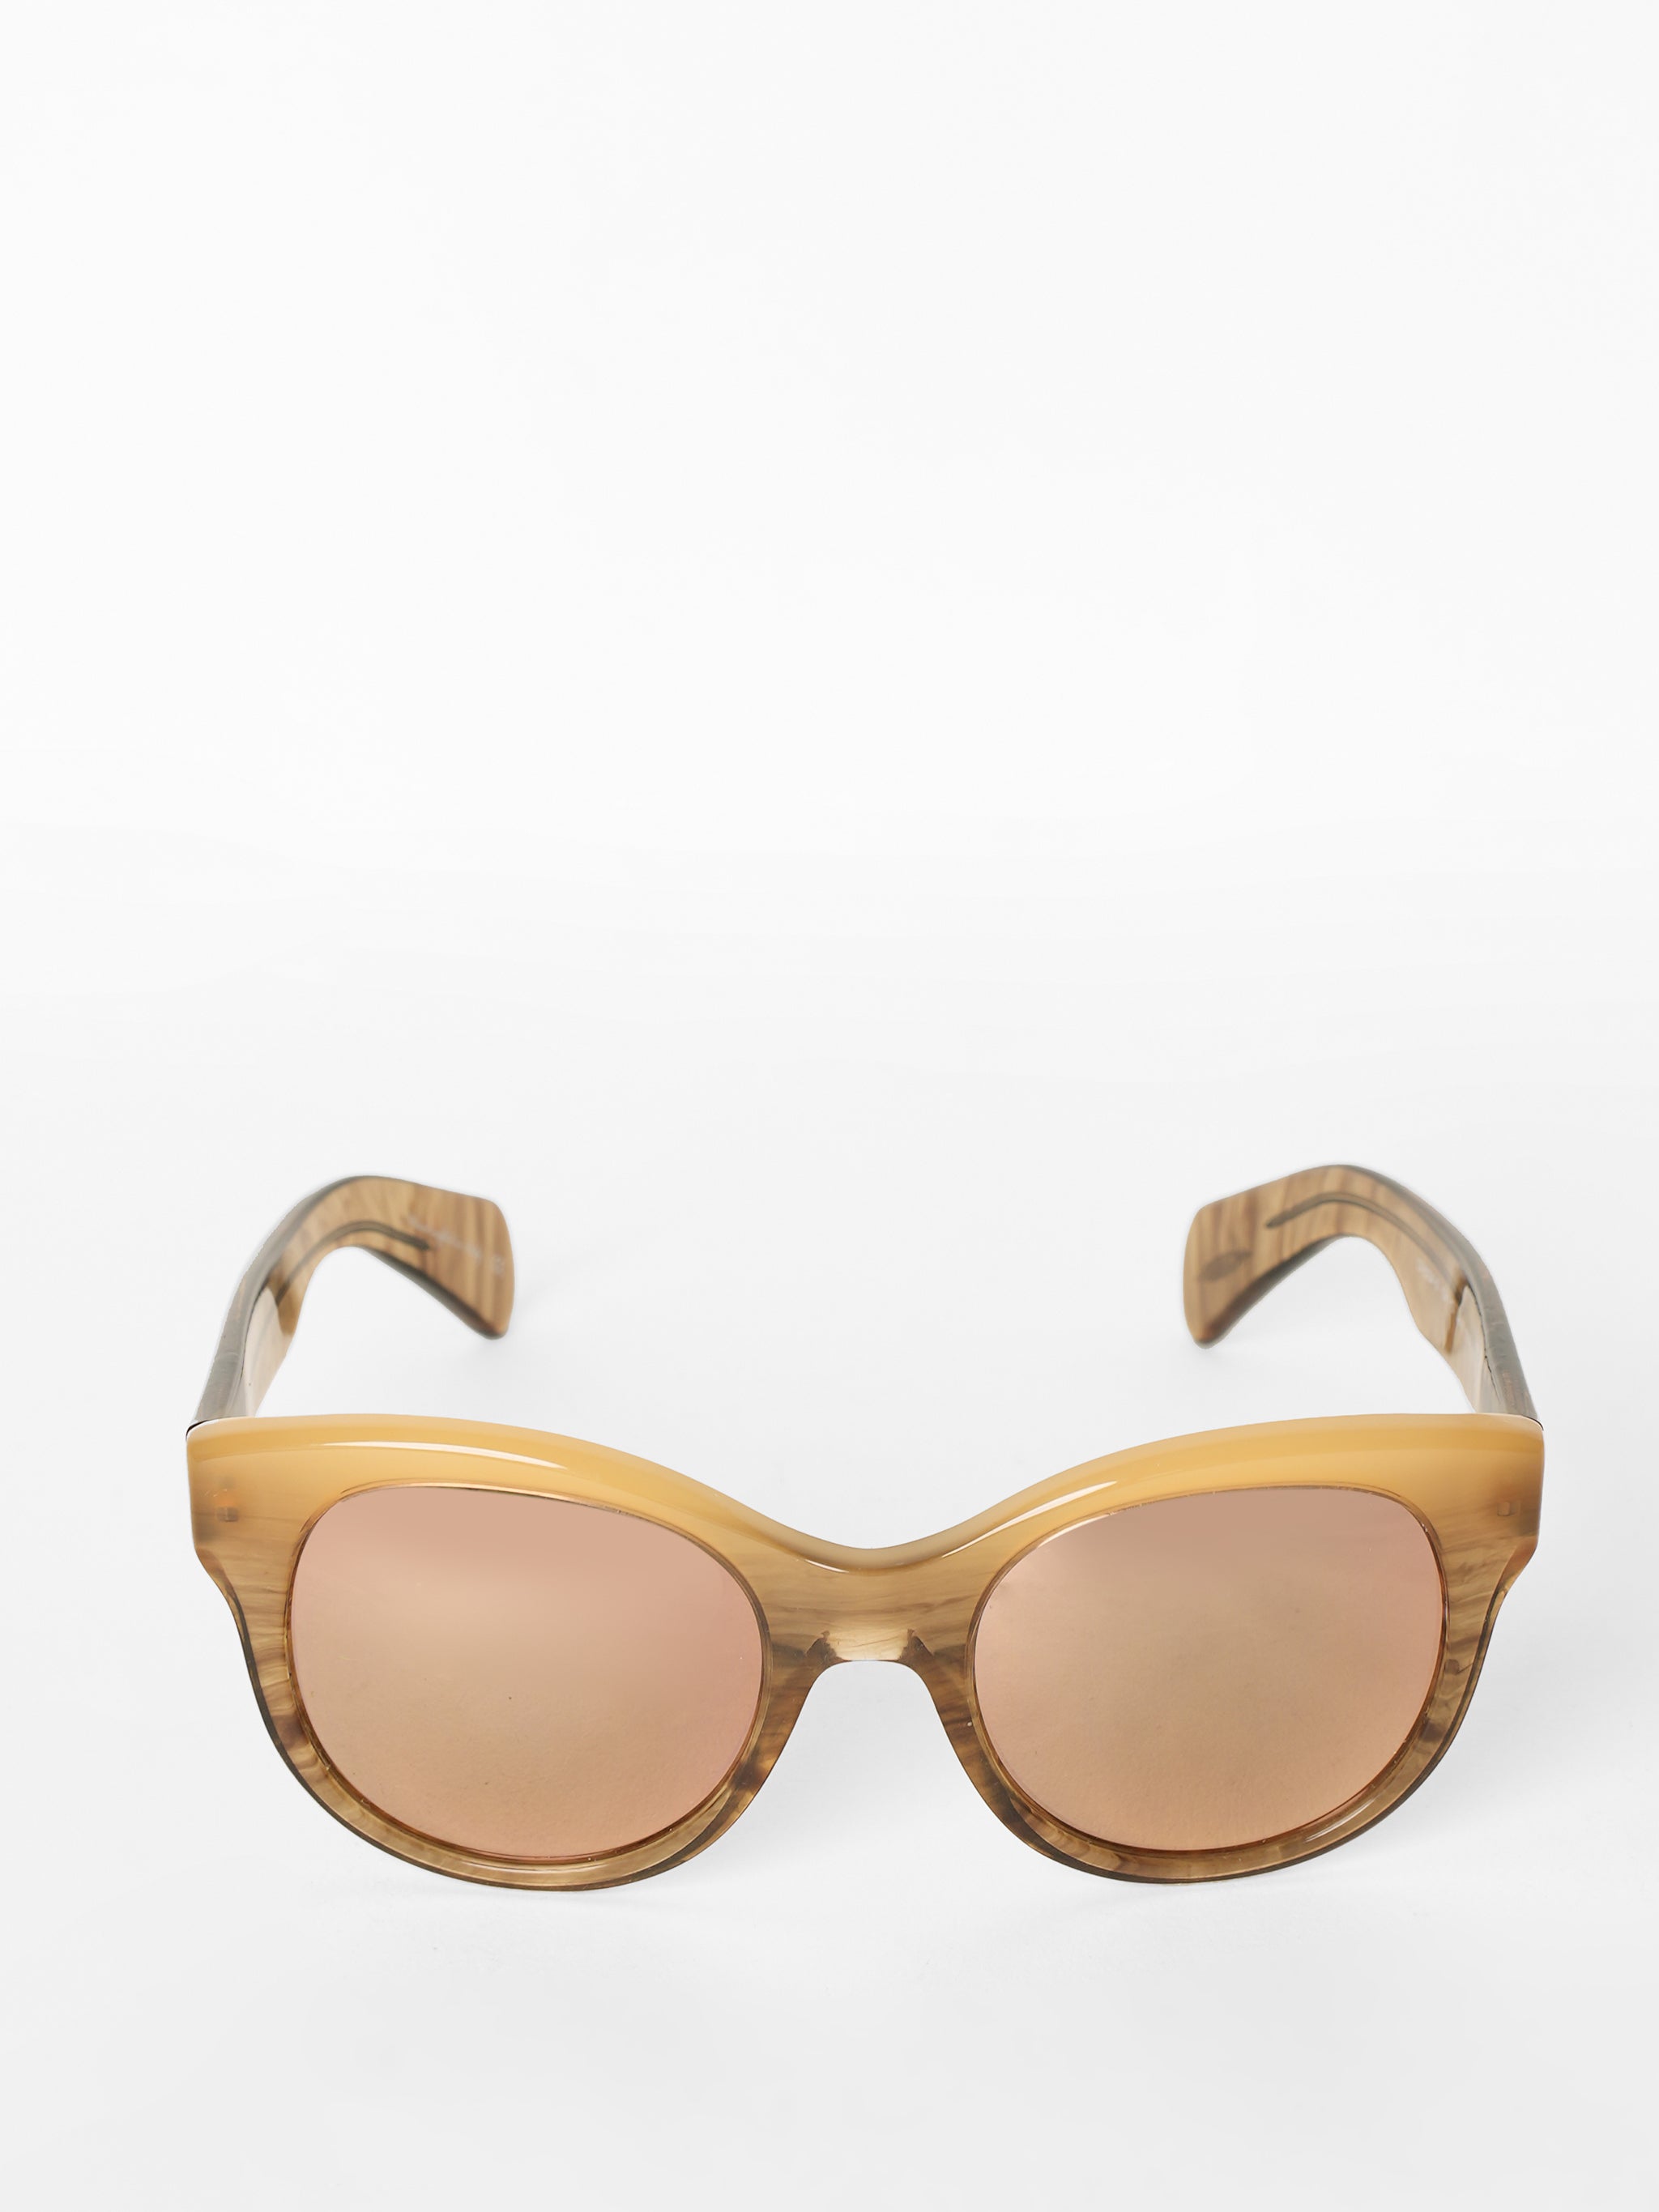 Louis Vuitton - Authenticated Sunglasses - Plastic Gold Abstract for Women, Never Worn